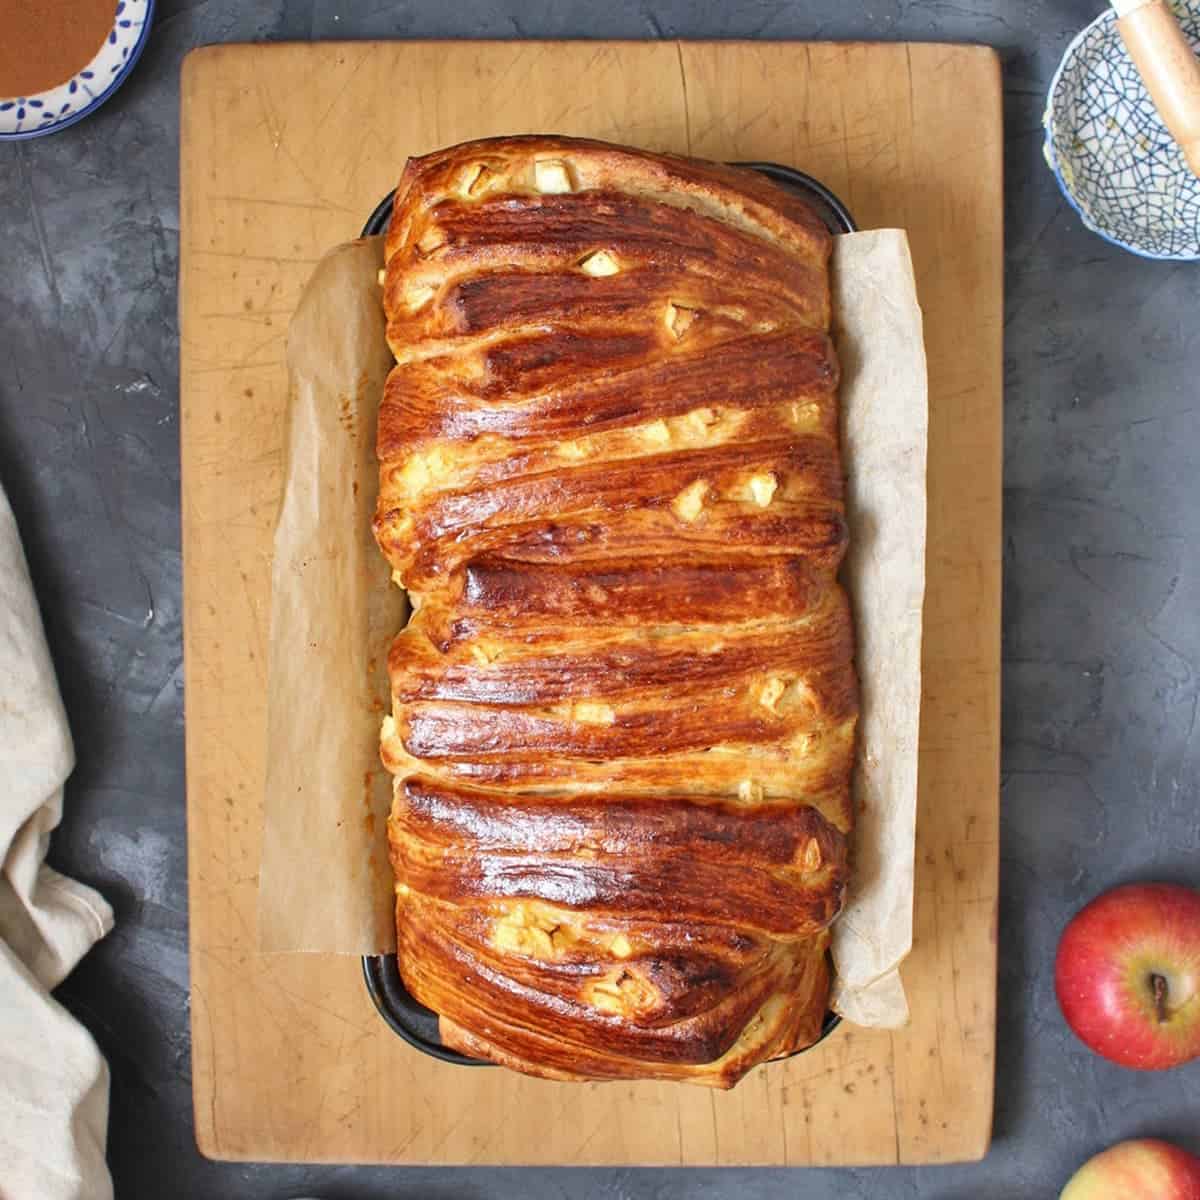 Sweet bread in the baking pan over a wooden board from above